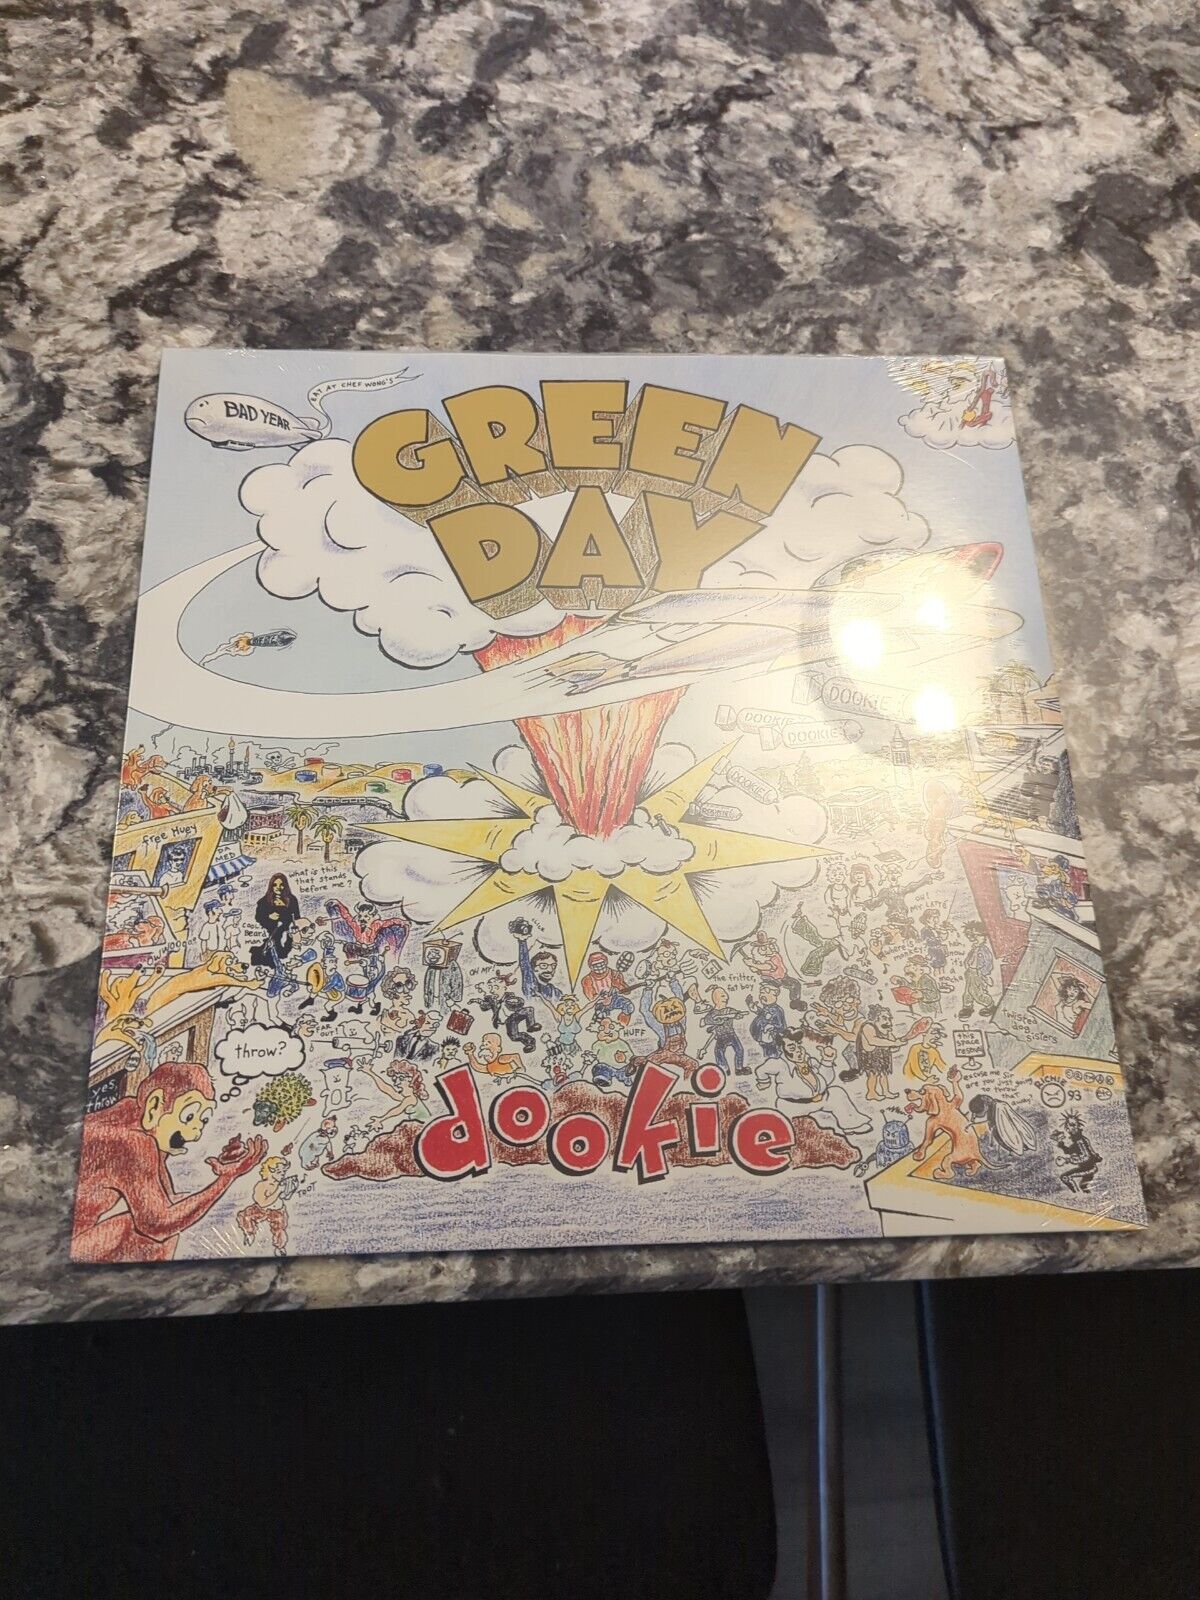 GREEN DAY - DOOKIE NEW VINYL Sealed Record 180G